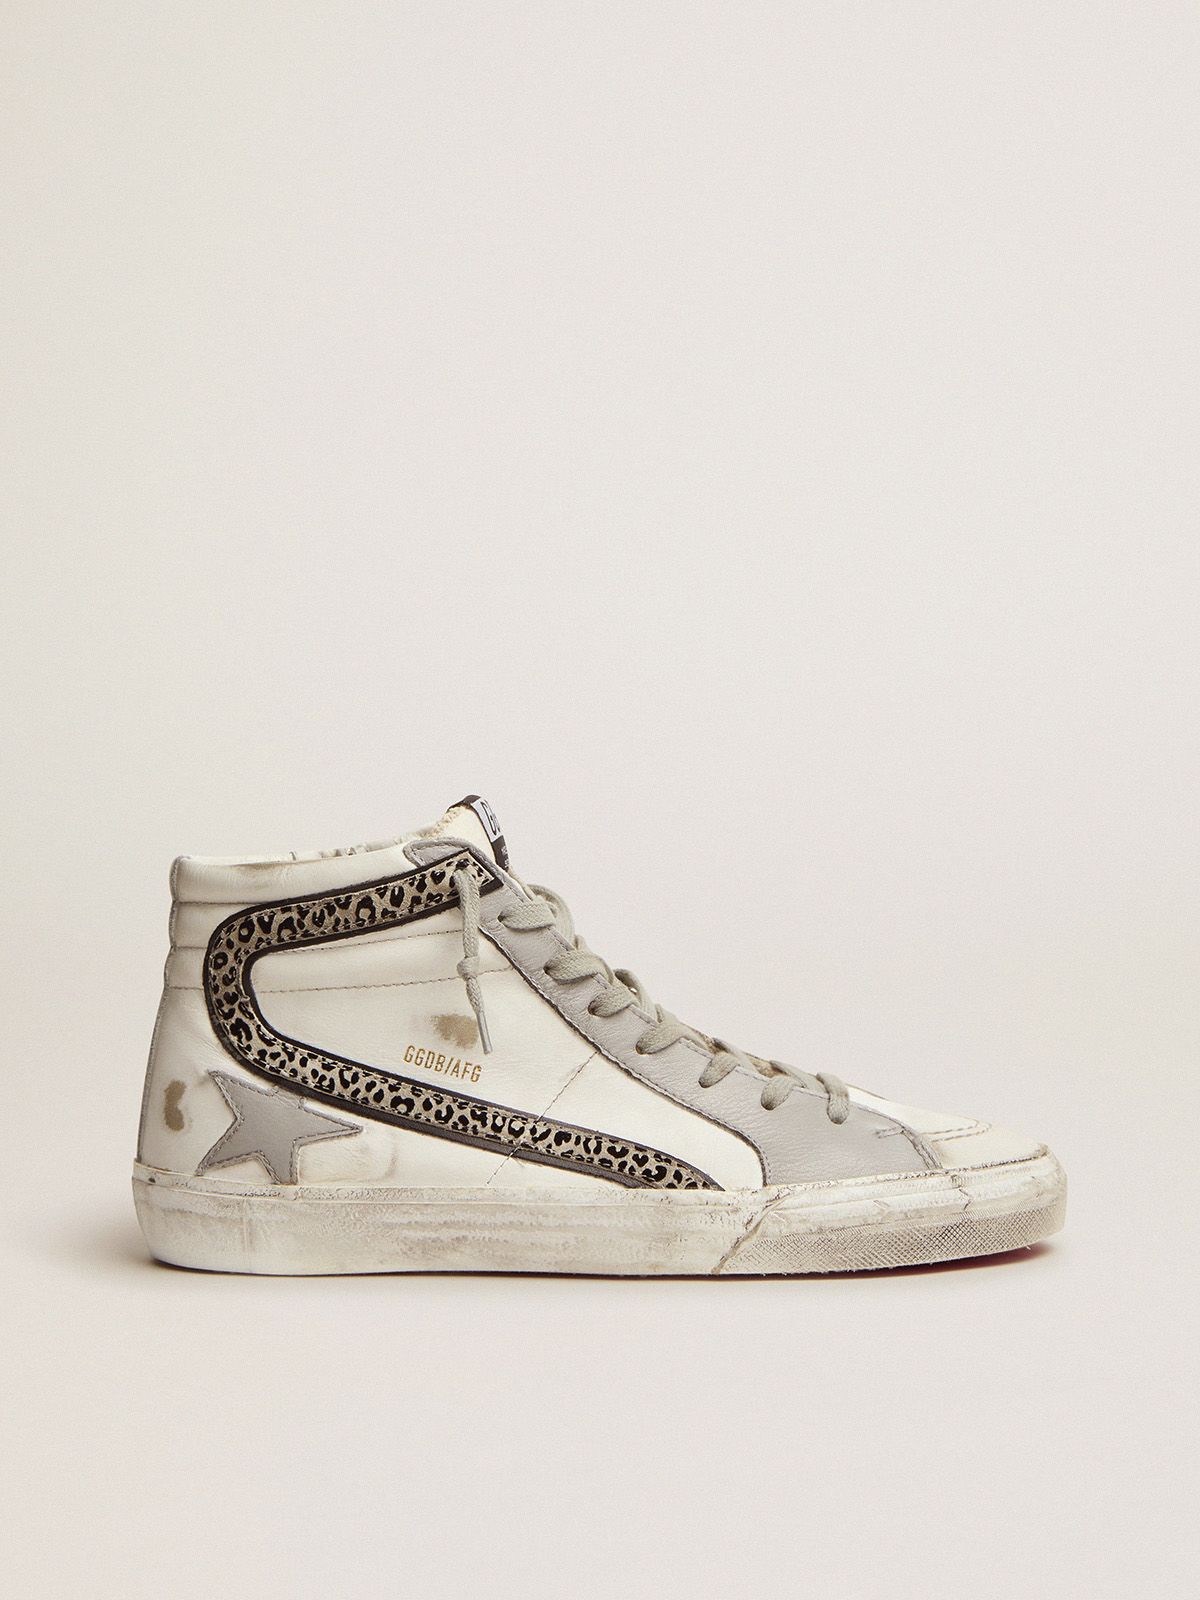 Golden Goose Donna Sneakers Slide sneakers with white leather upper and animal-print suede flash